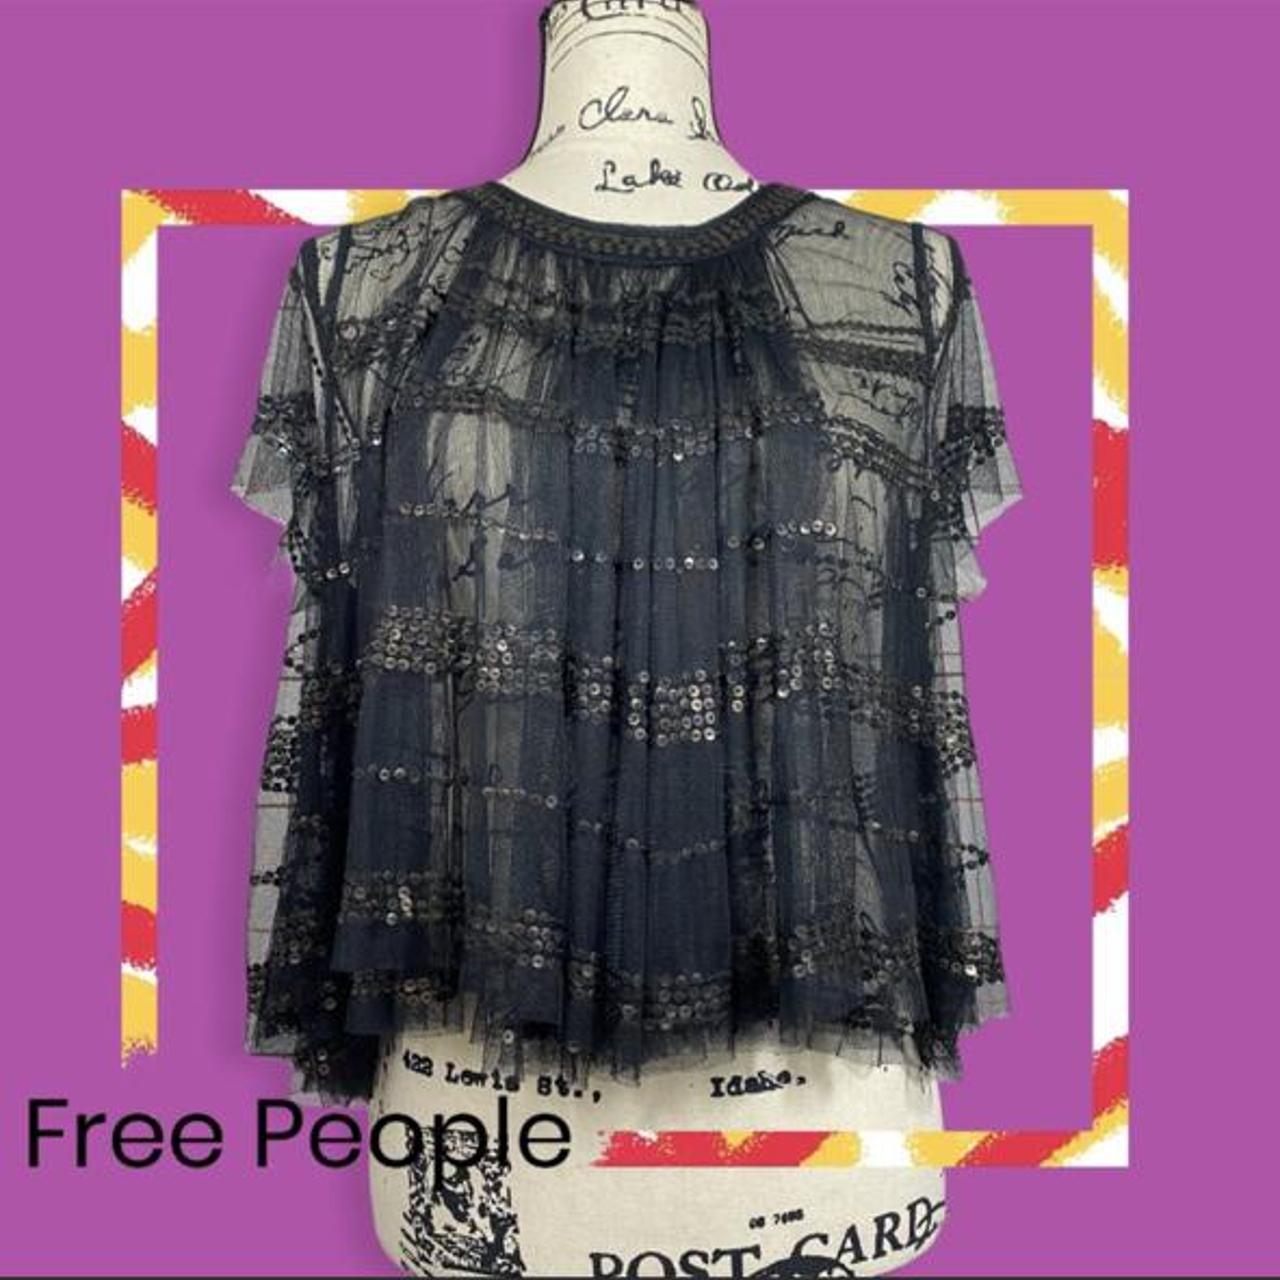 Product Image 1 - Perfect condition Free People Top
See